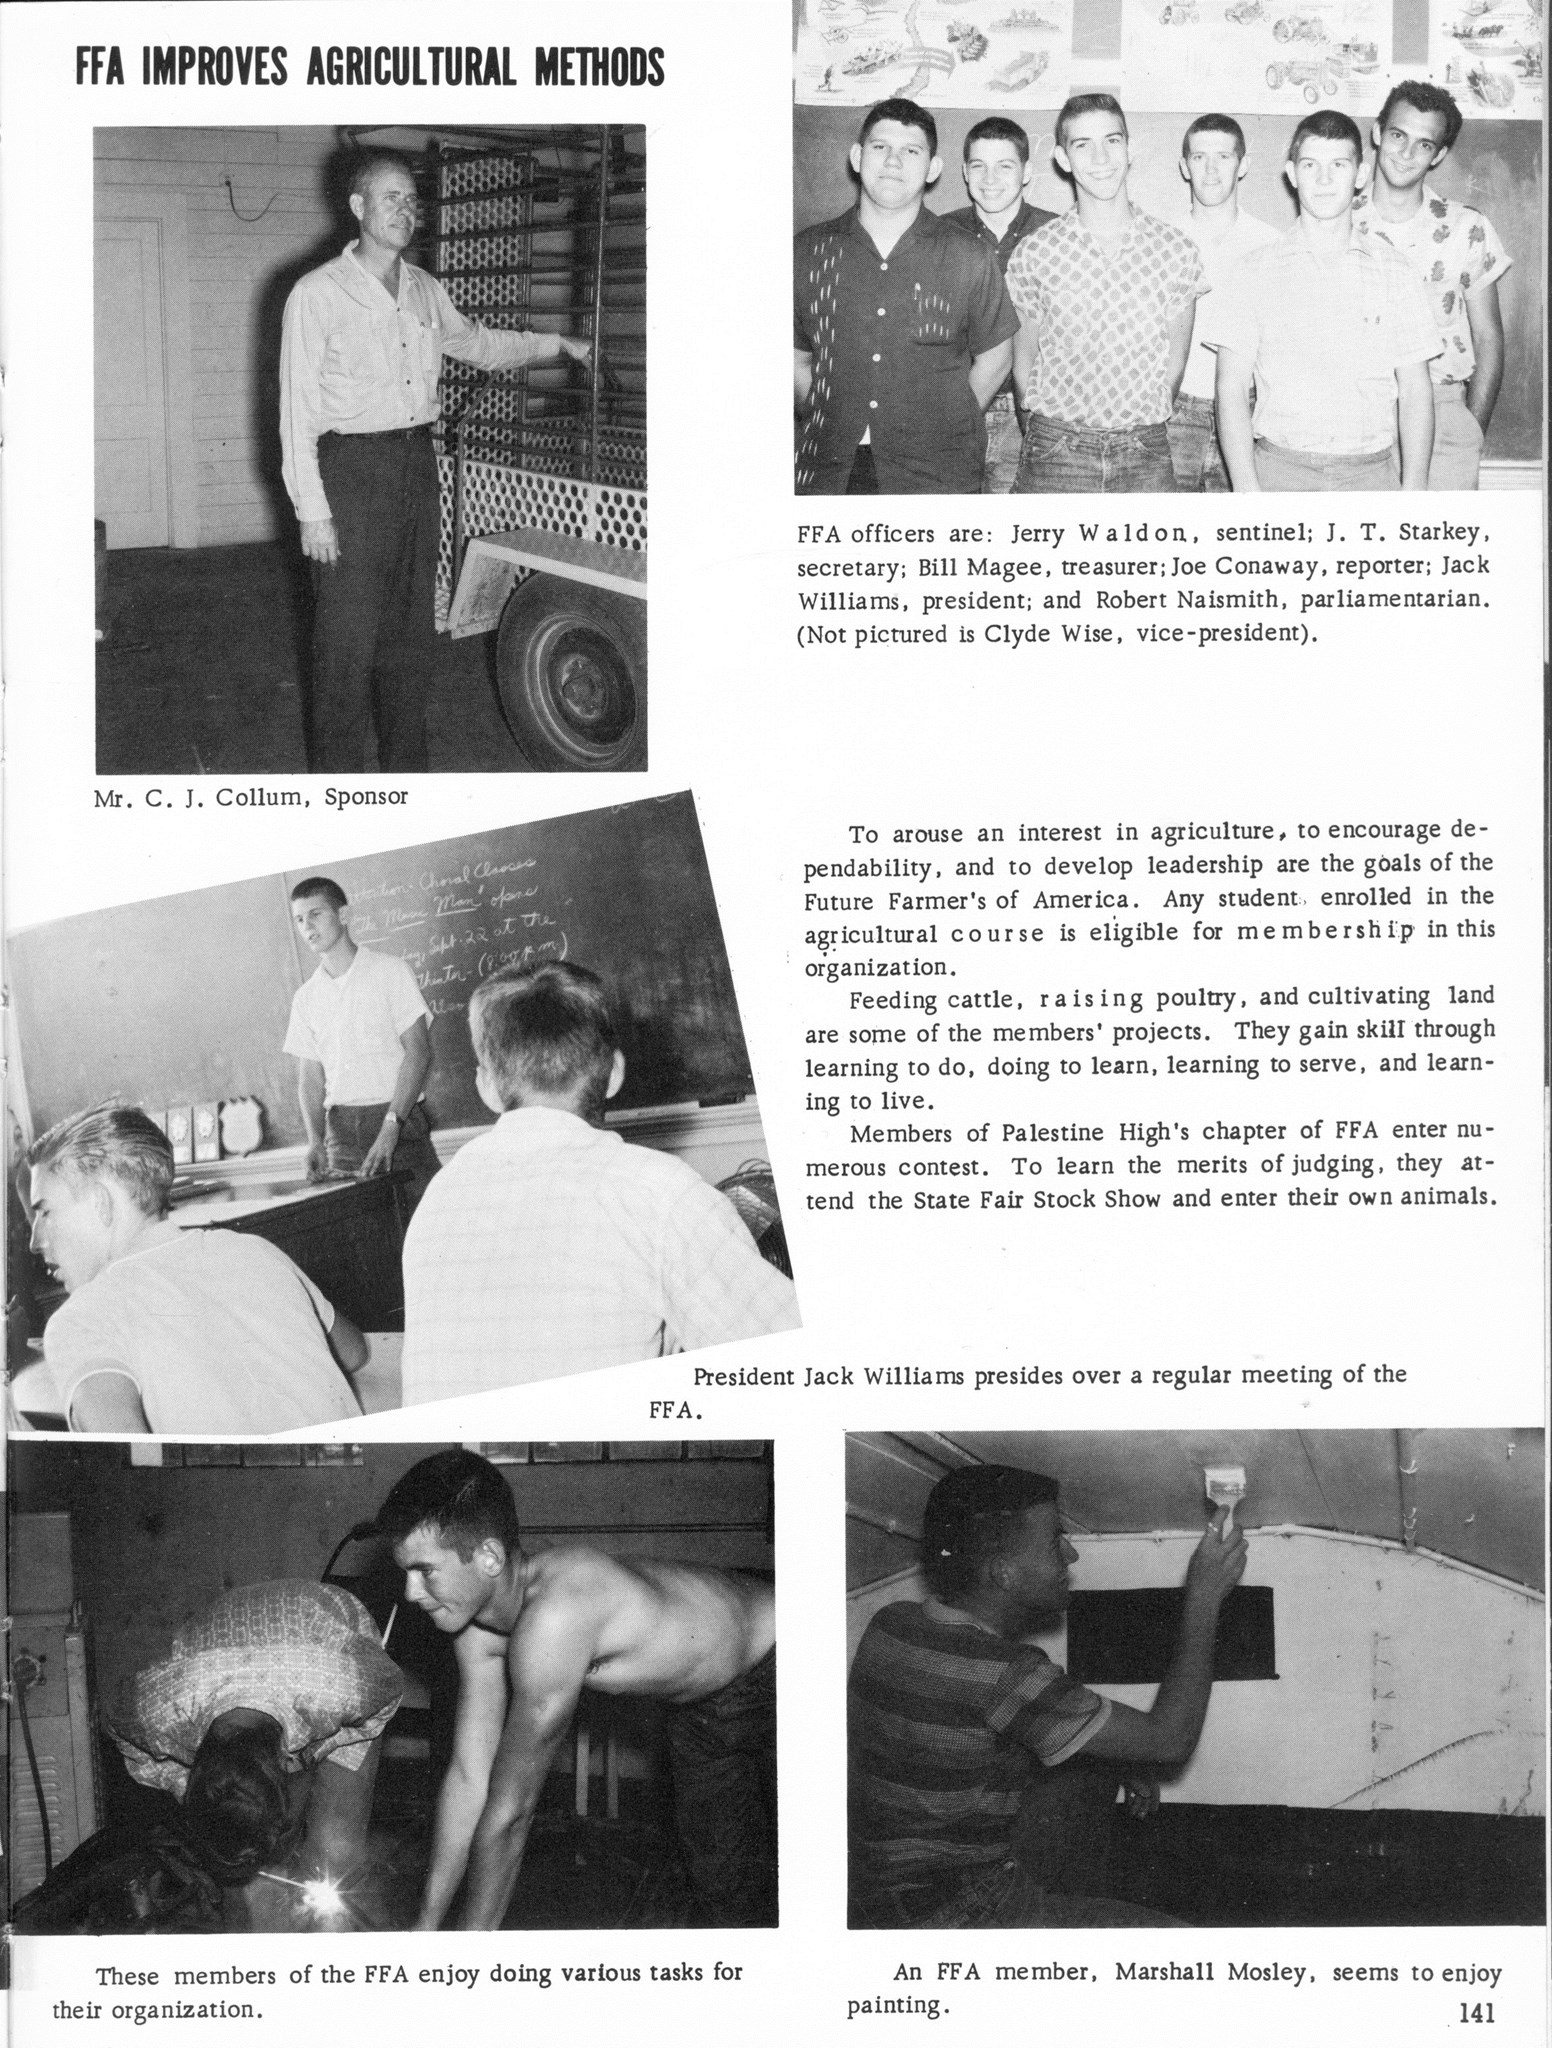 ../../../Images/Large/1963/Arclight-1963-pg0141.jpg